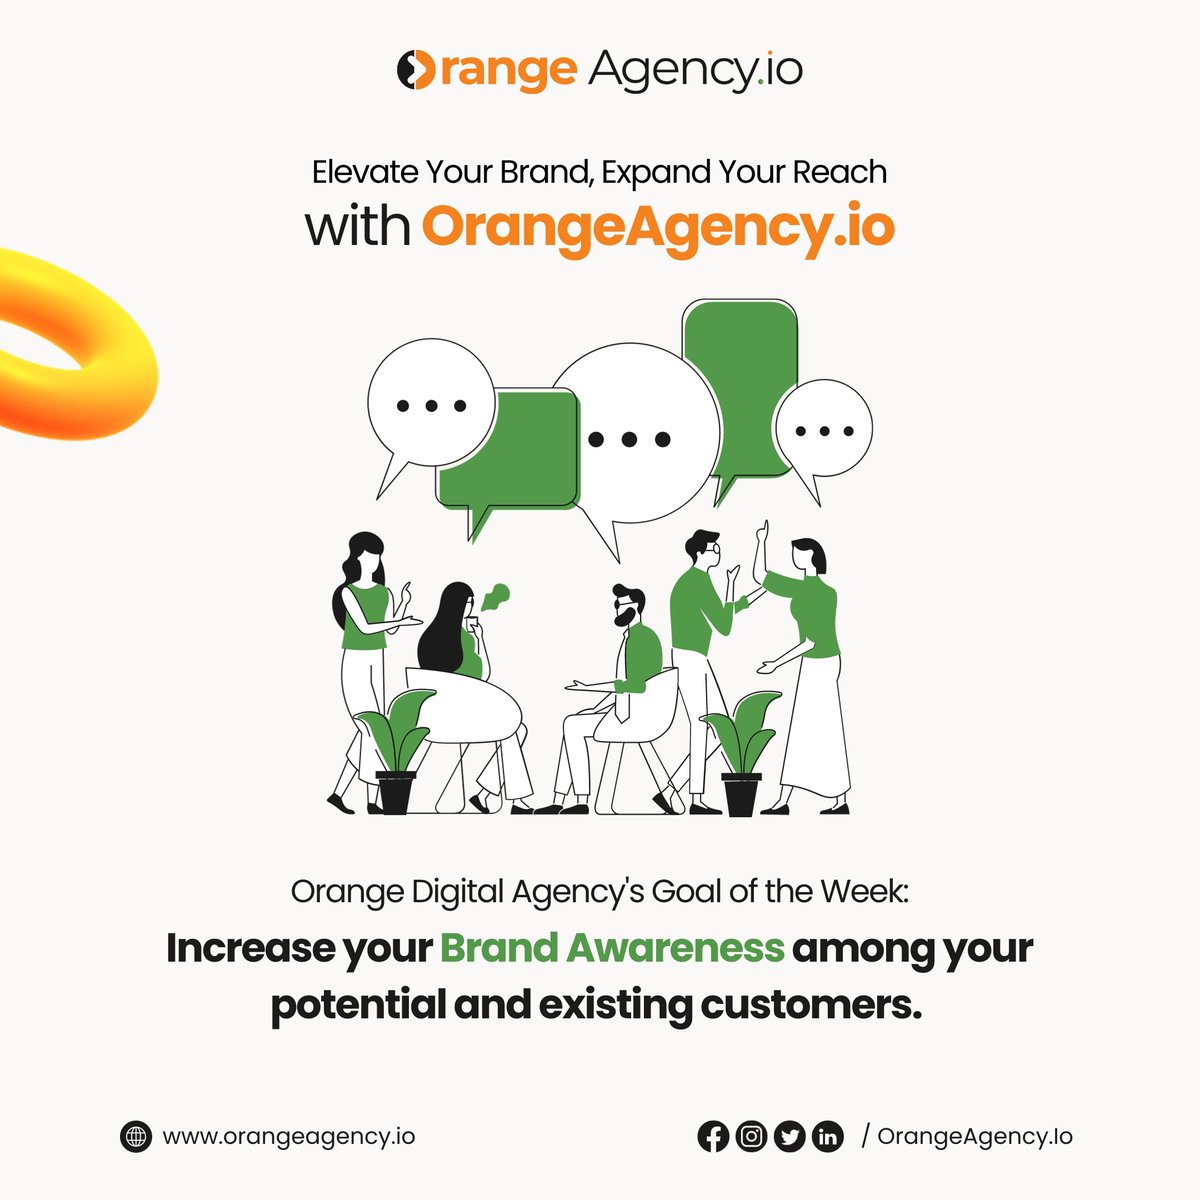 Elevate Your Brand, Expand Your Reach.

Let's make your brand the talk of the town!  orangeagency.io

#OrangeAgency #BrandAwareness #DigitalMarketing #MarketingStrategy #OnlinePresence #CustomerEngagement #BoostYourBrand #Success #Niger #ElonMusk #Titanic #TheEqualizer3